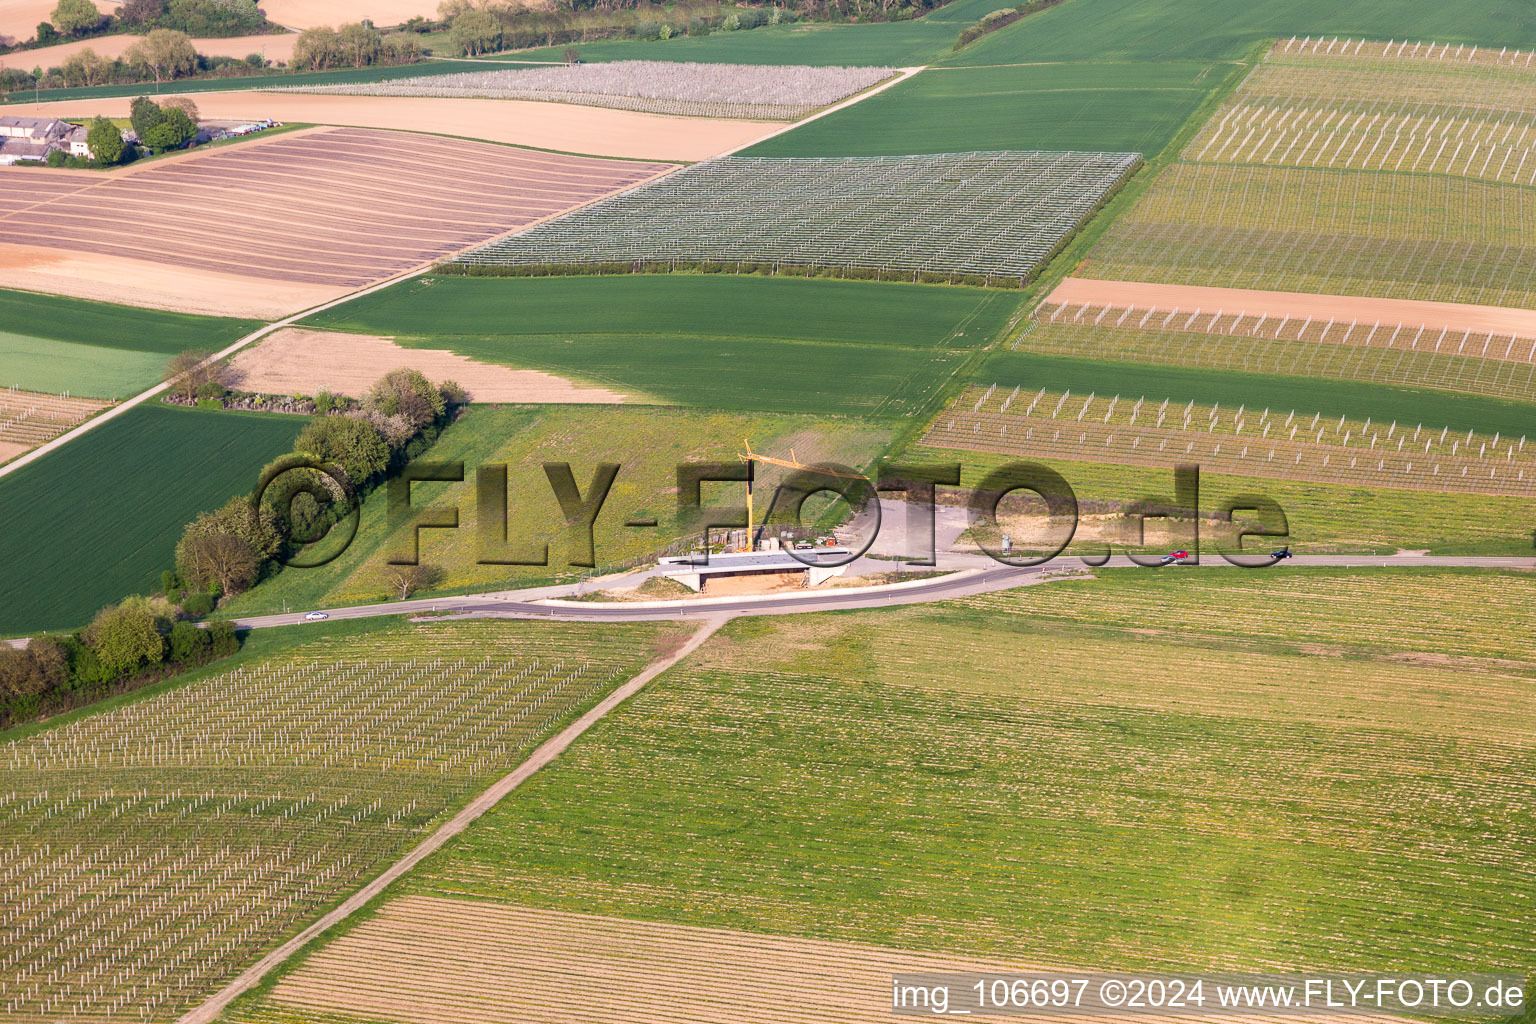 Bypass construction site in Impflingen in the state Rhineland-Palatinate, Germany